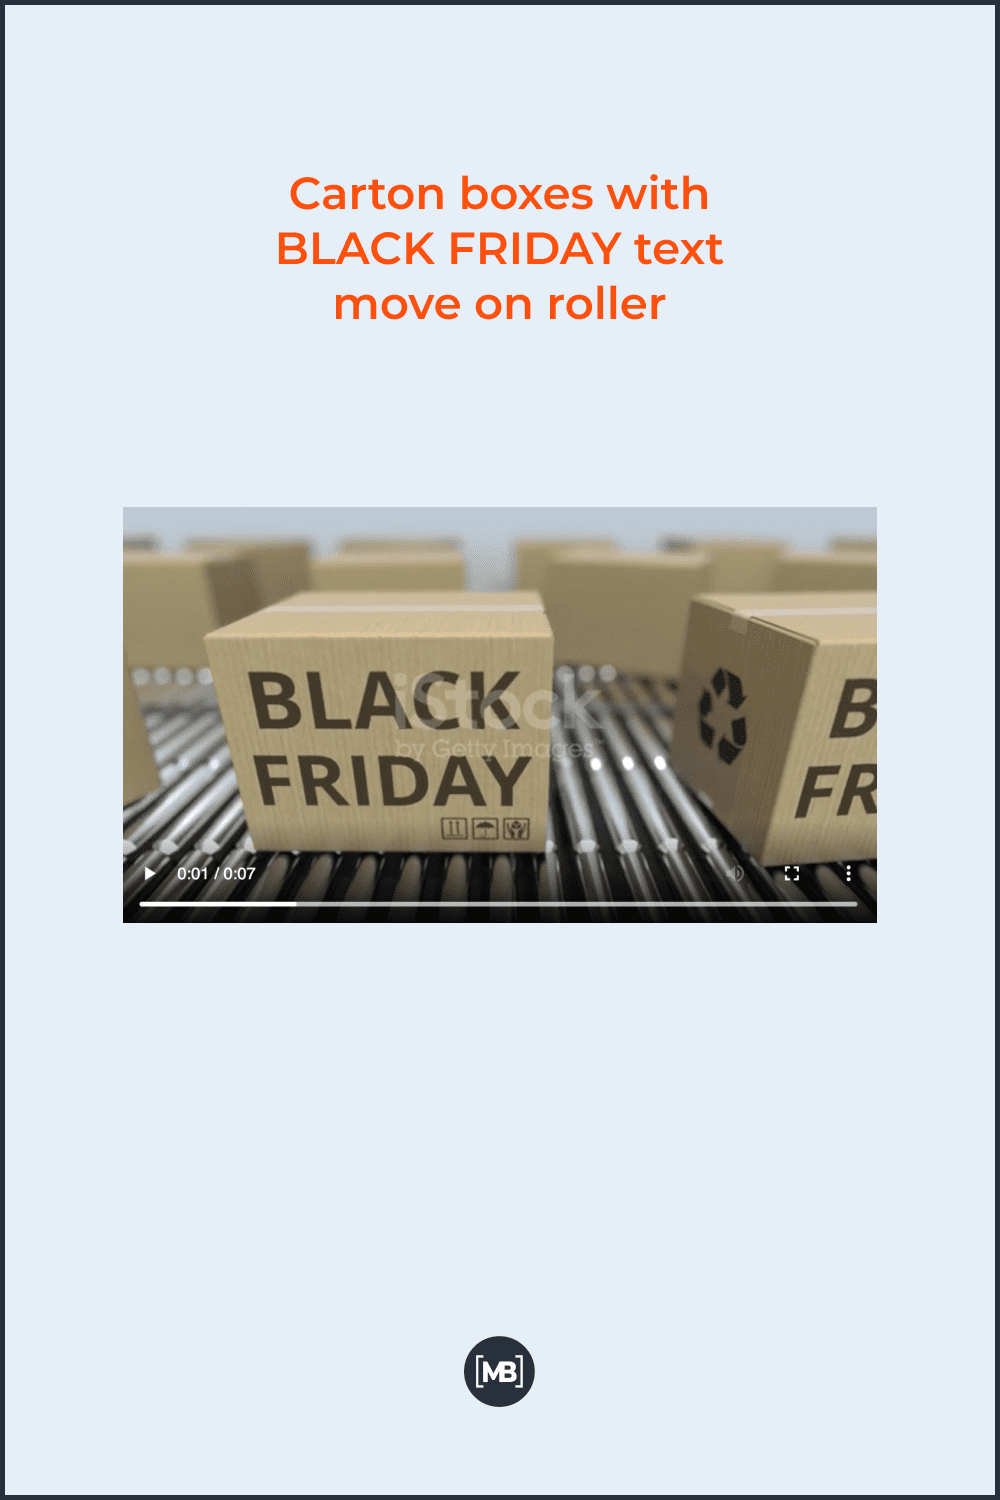 Carton boxes with Black Friday text move on roller.